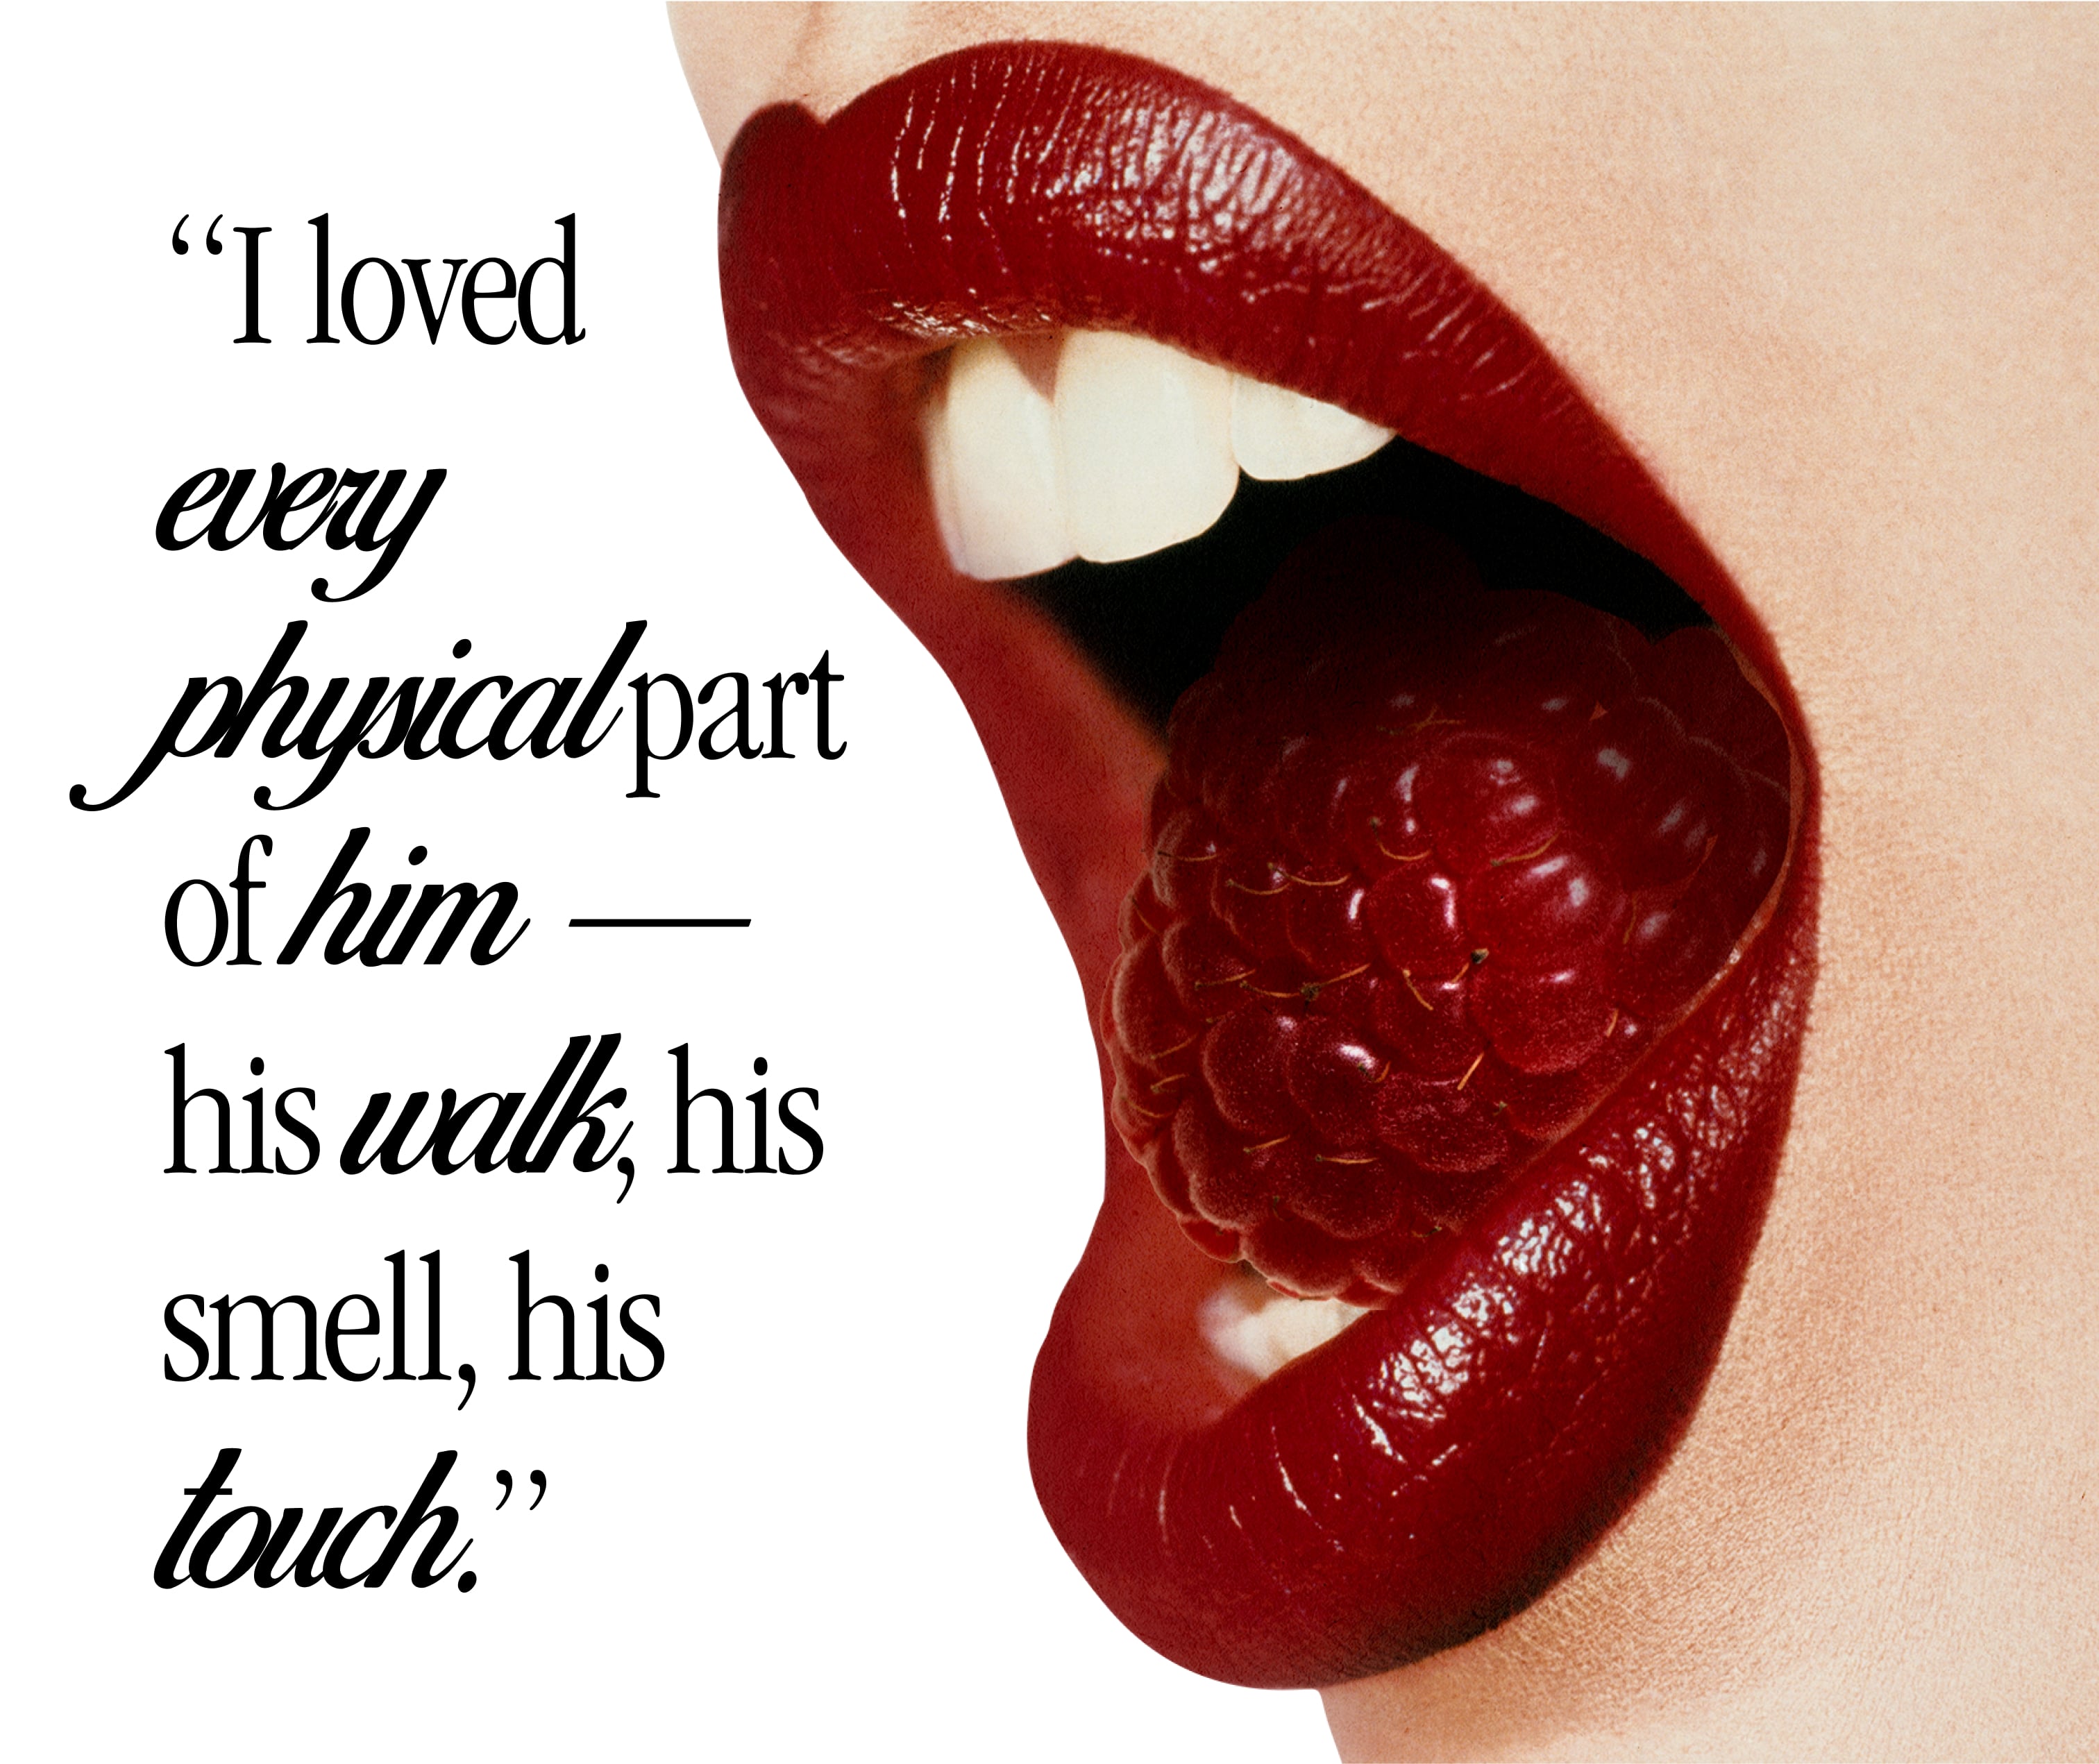 quote: 'I loved every physical part of him - his walk, his smell, his touch.' picture of mouth open with a raspberry inside